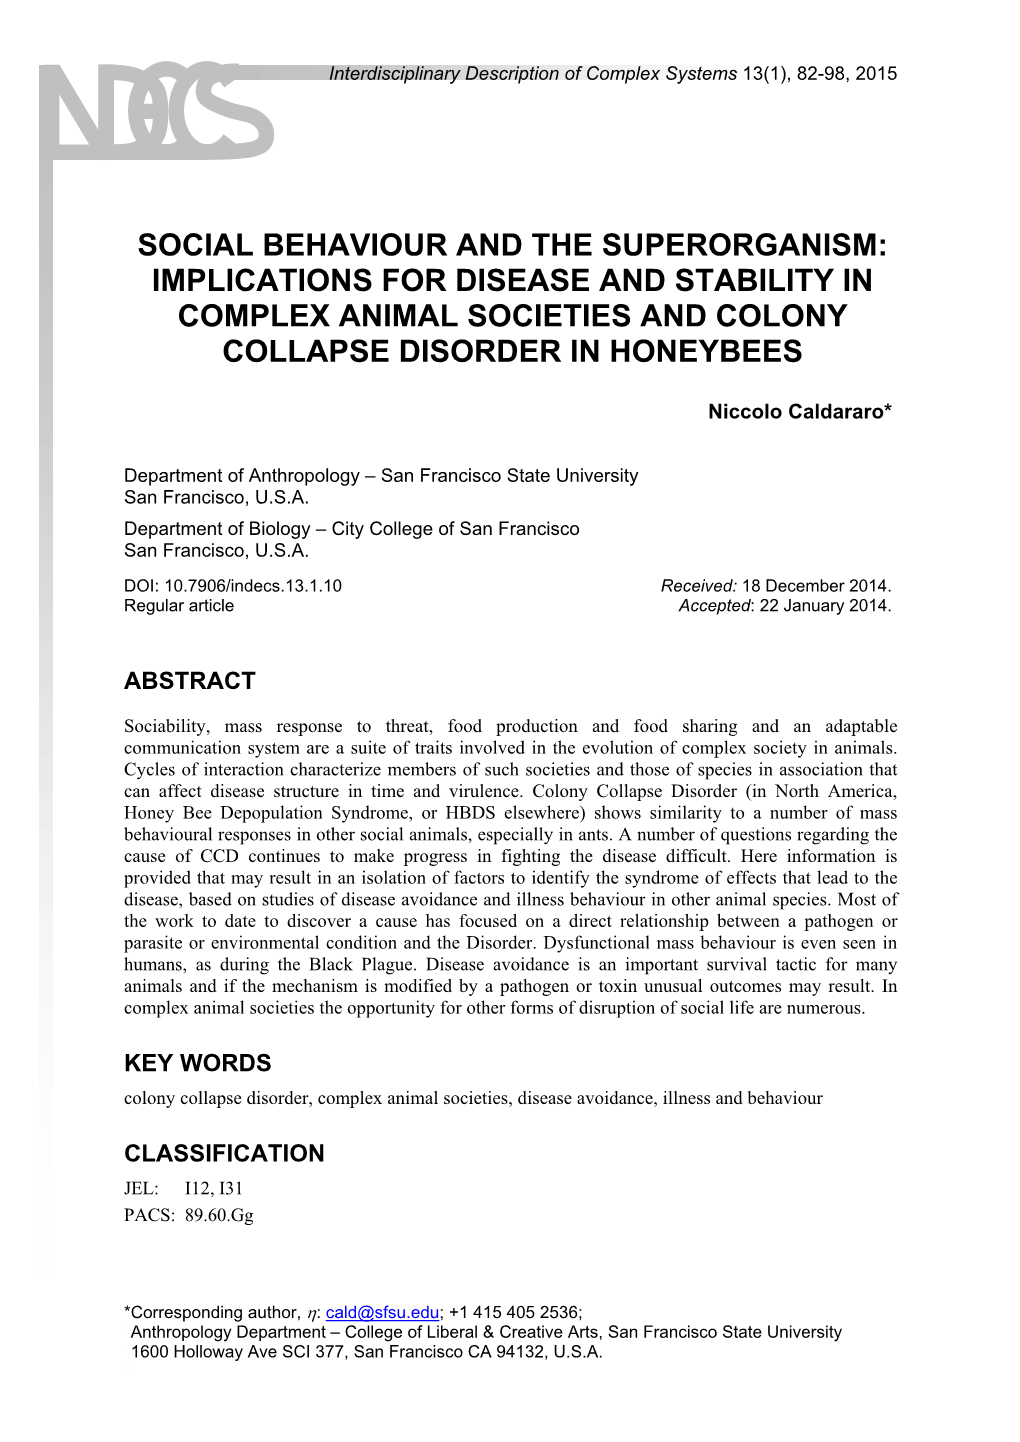 Social Behaviour and the Superorganism: Implications for Disease and Stability in Complex Animal Societies and Colony Collapse Disorder in Honeybees